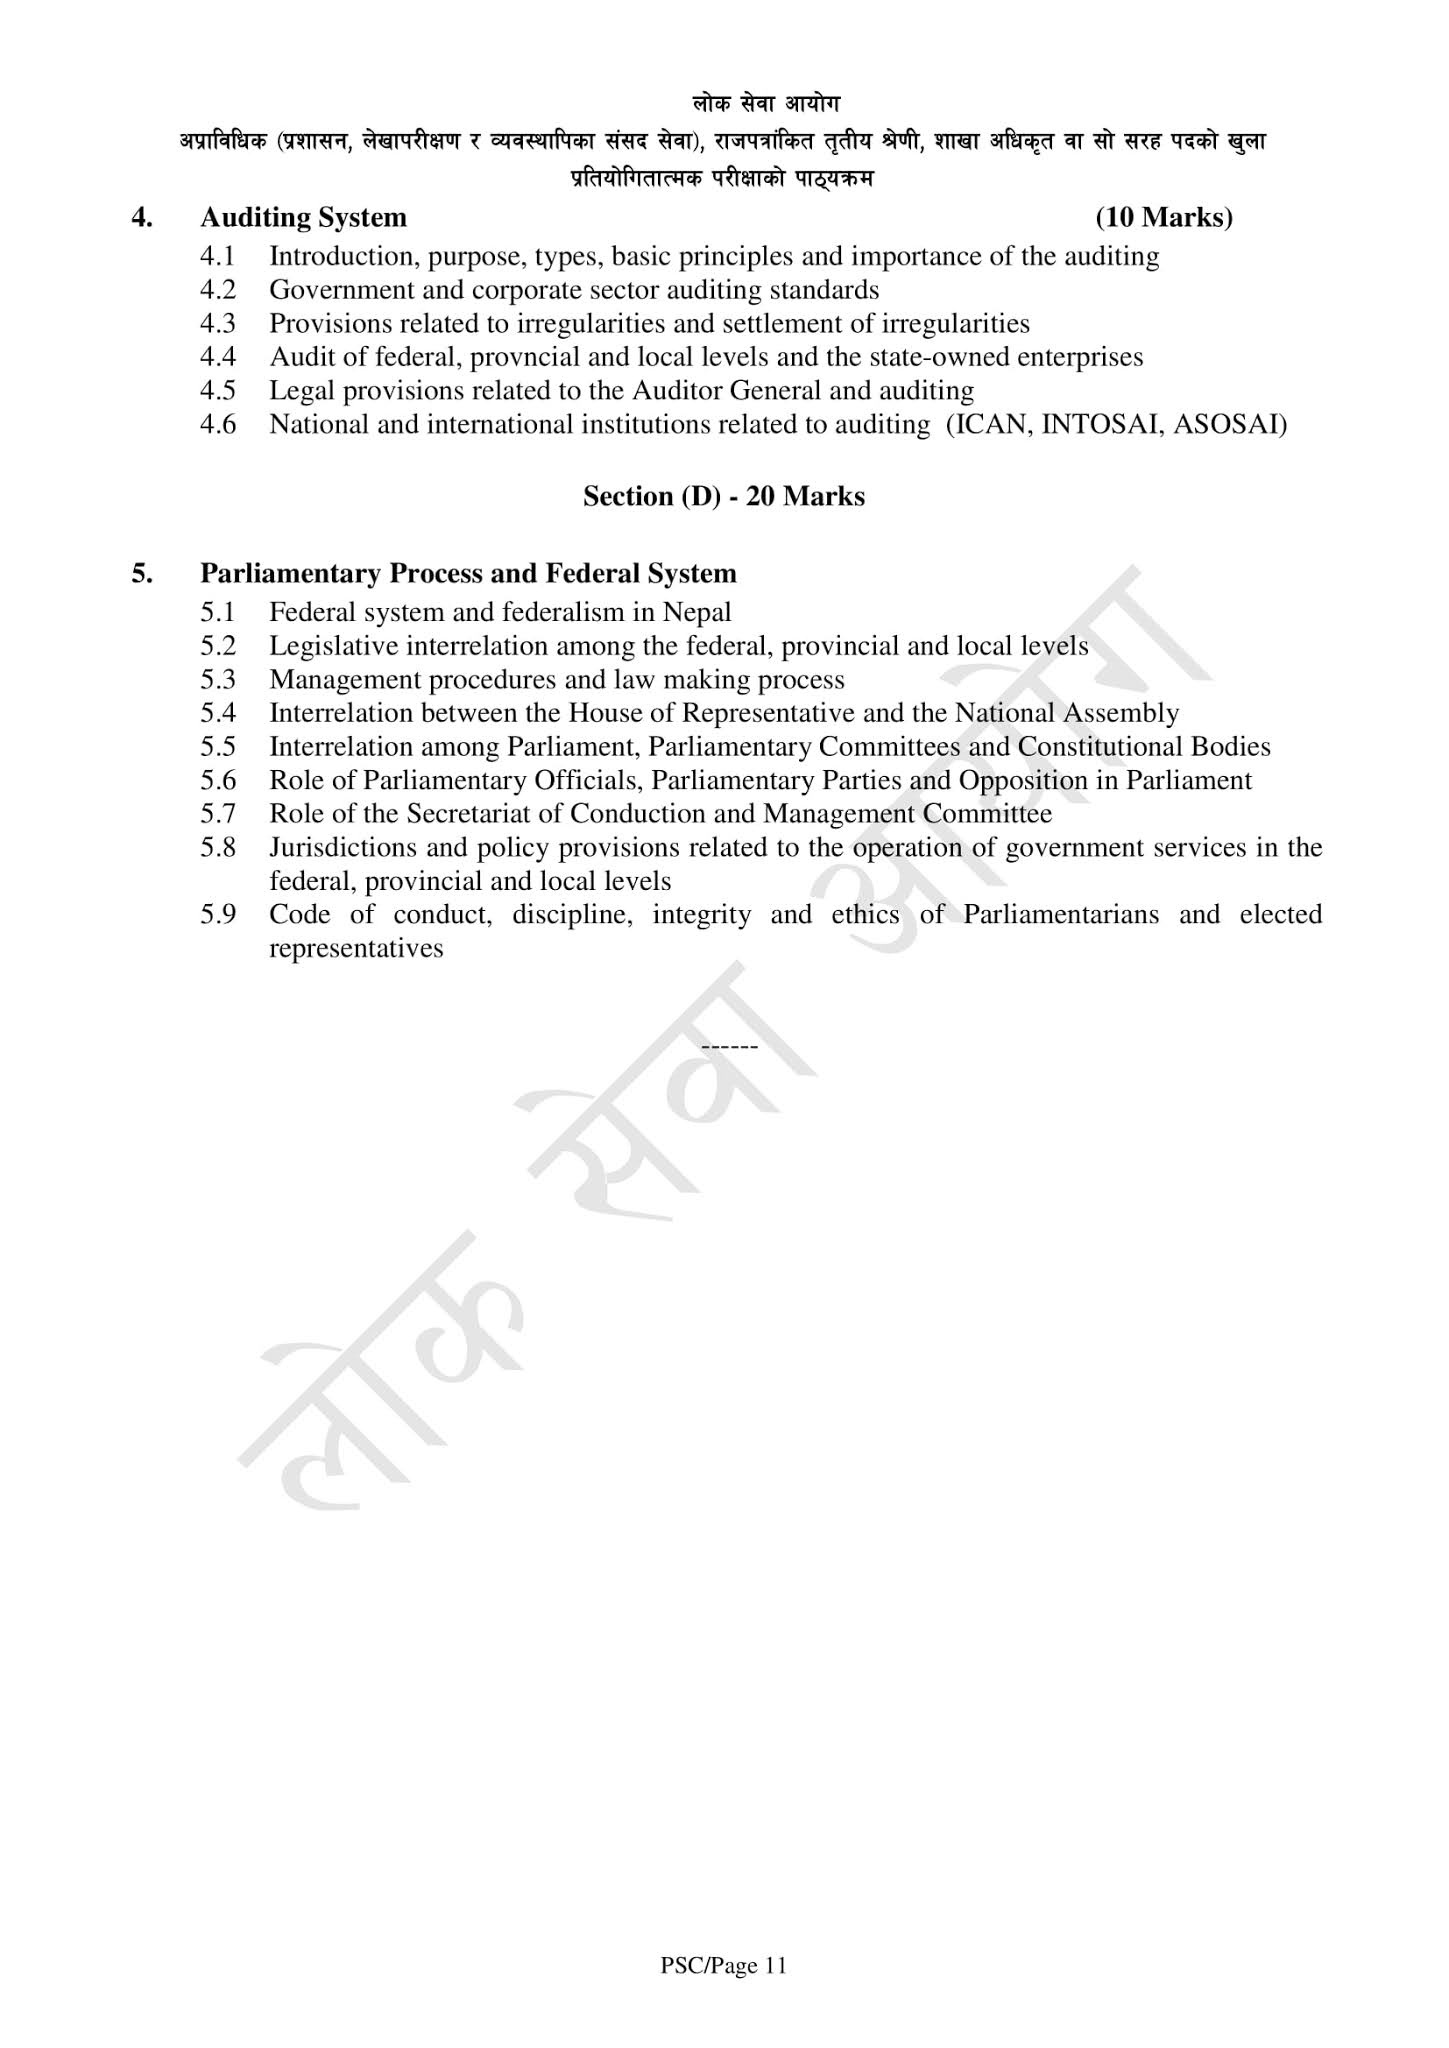 New Syllabus For Section Officer And Officer 6th Level